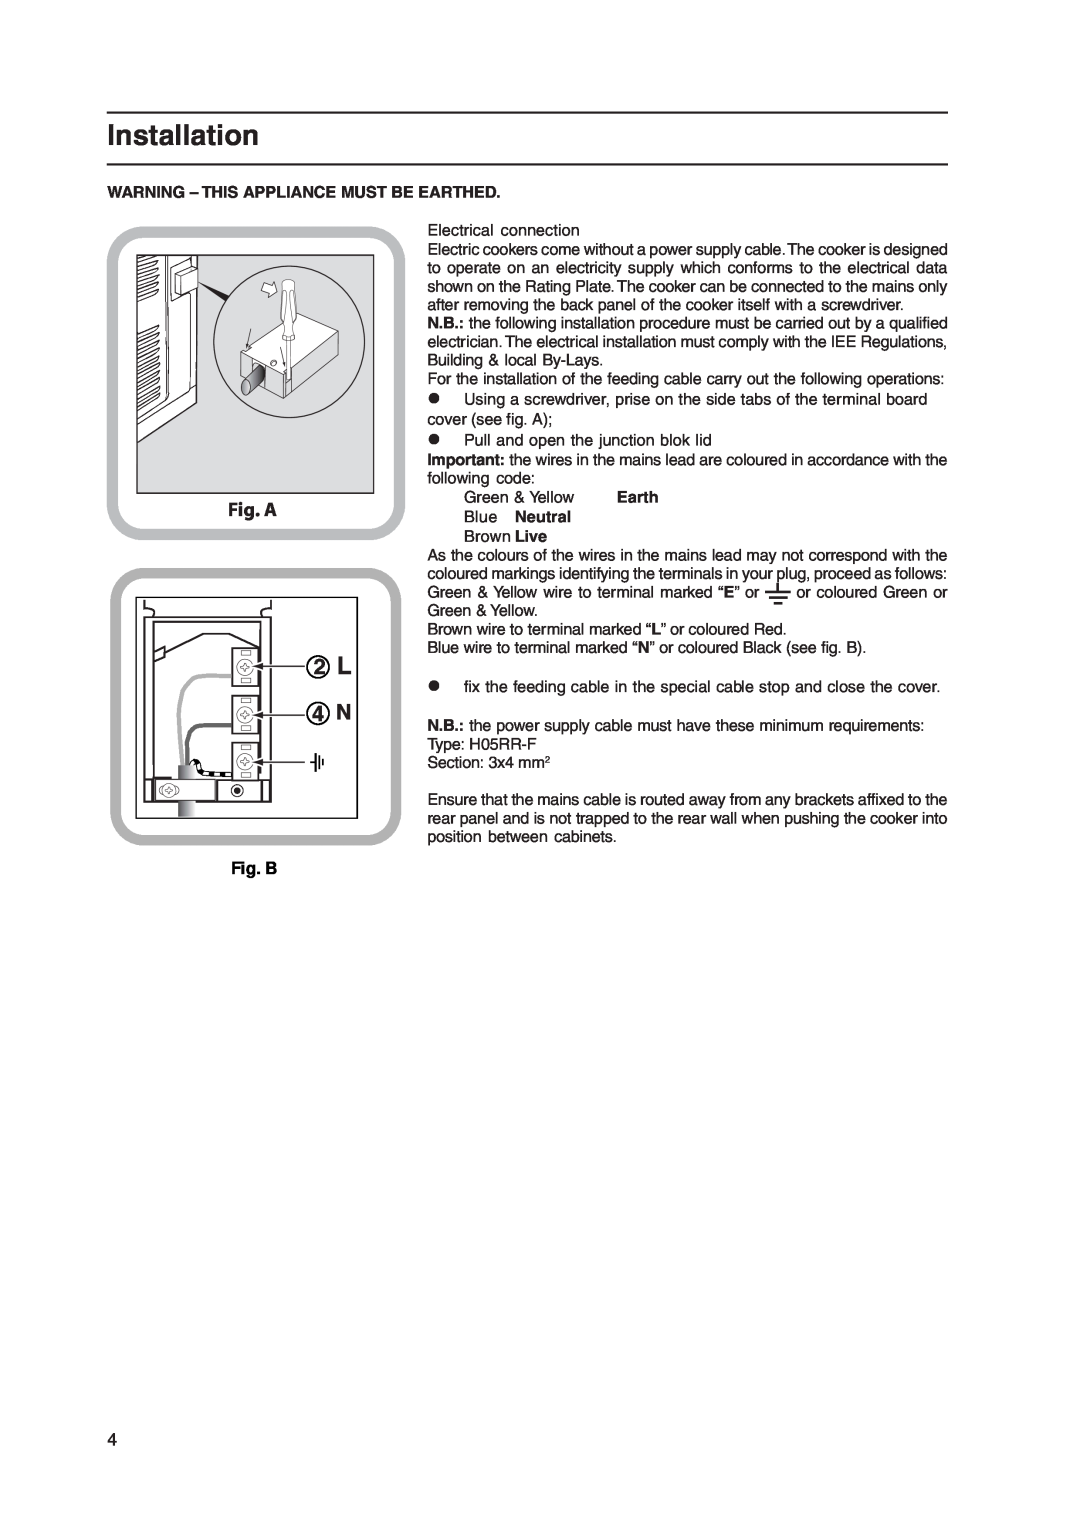 Hotpoint 51TCW, EK50 EW50, C358EWH Installation, Fig. A, Fig. B, Warning - This Appliance Must Be Earthed, Blue Neutral 